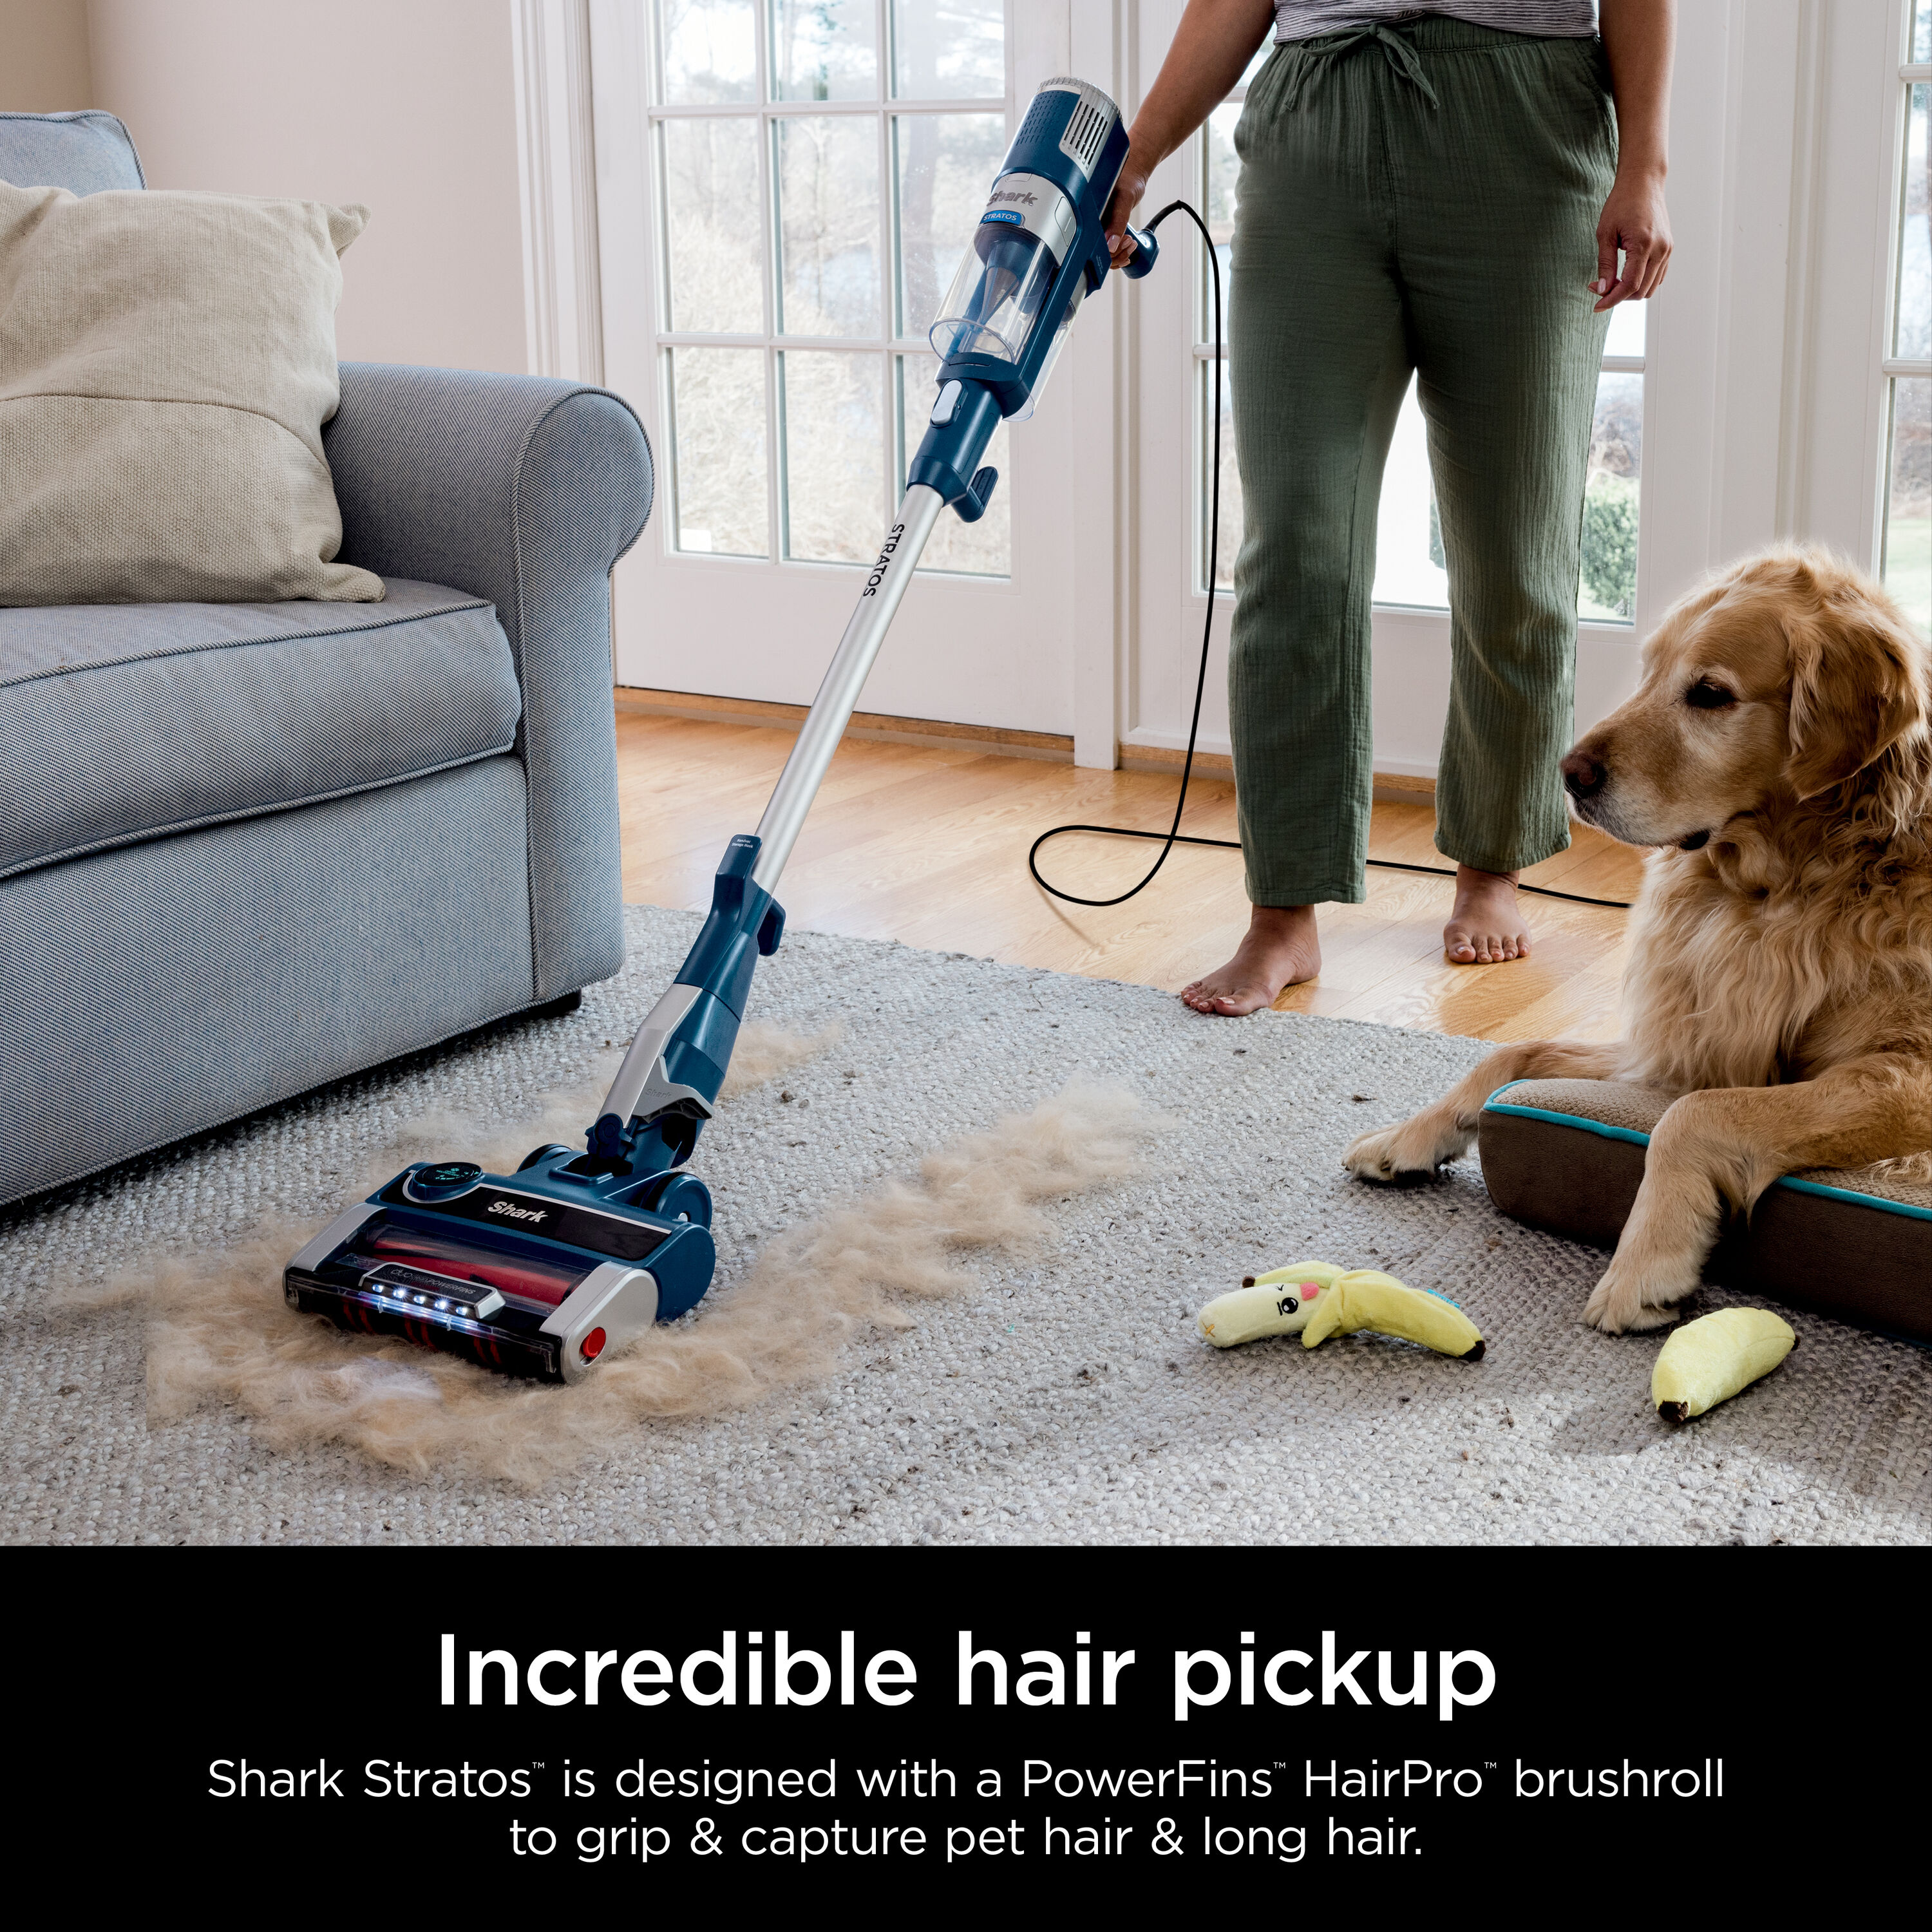 Black And Decker Hepa Corded Steam Mop And Vacuum Cleaner Combination Duo  Bundle With 3 In 1 Convertible Corded Upright Handheld Vacuum Cleaner :  Target